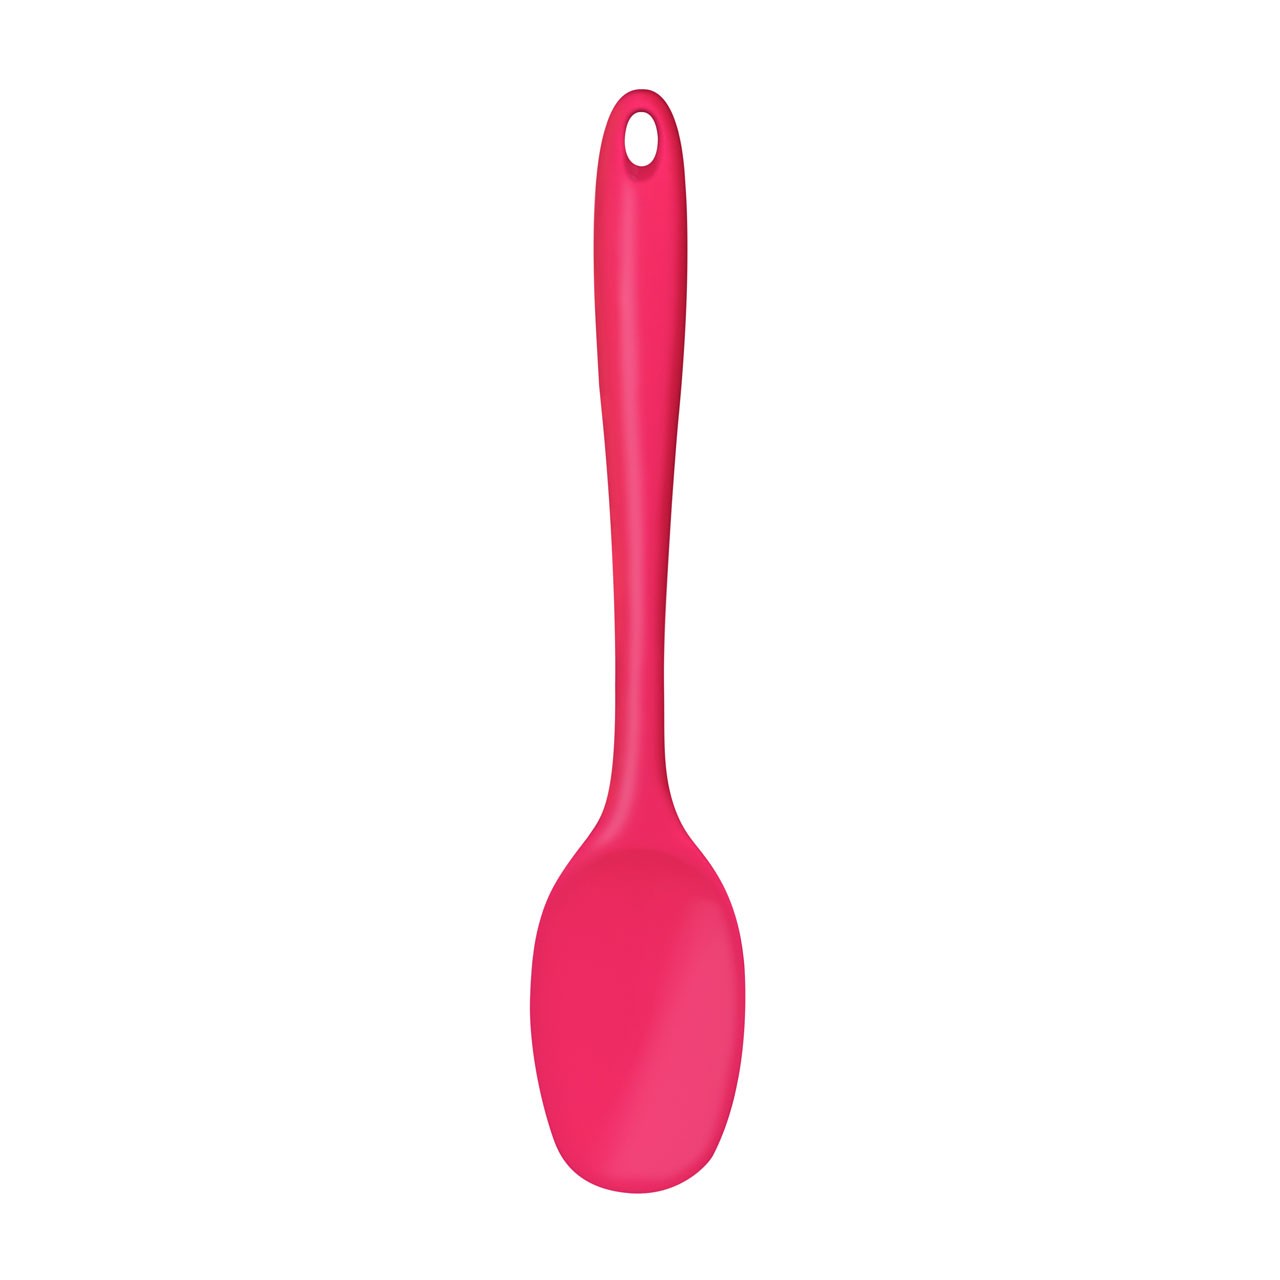 ZING! Silicone Spoon - Hot Pink